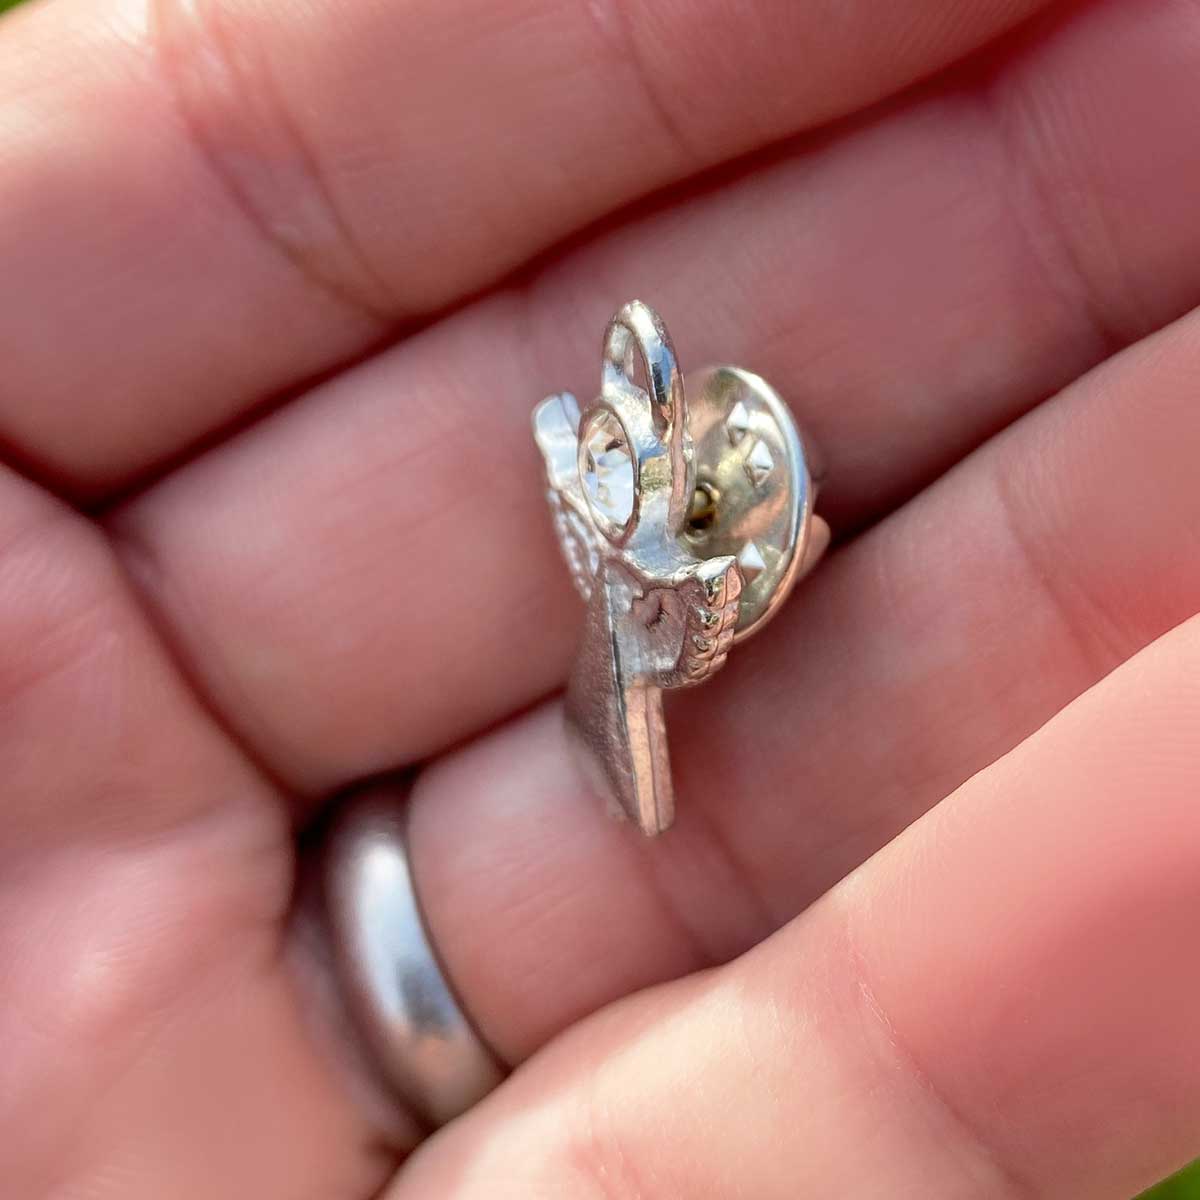 'As long as we have Angels near...' Angel Pin